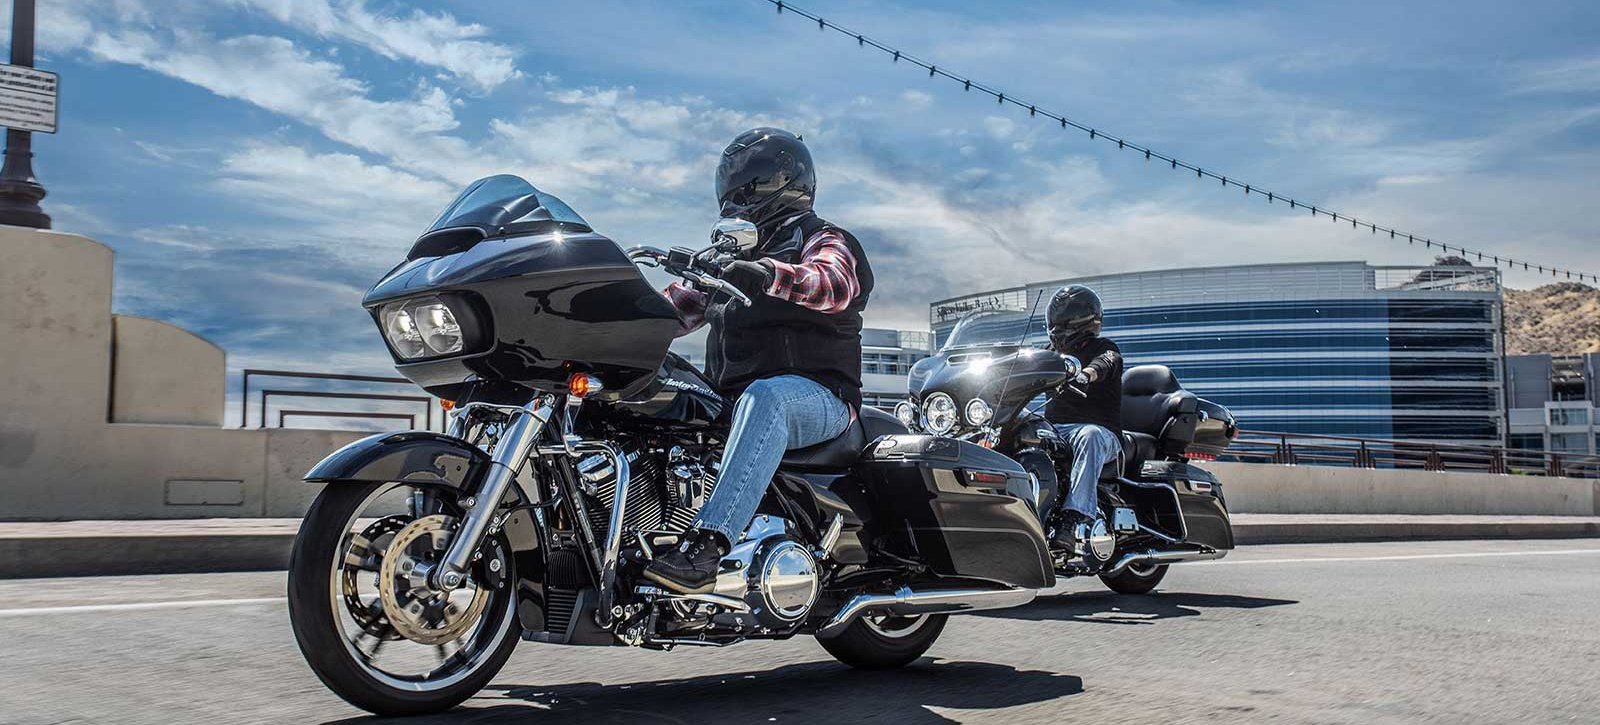 Harley-Davidson® Audio Powered by Rockford Fosgate: motorcycles driving over Tempe Town Lake in Arizona